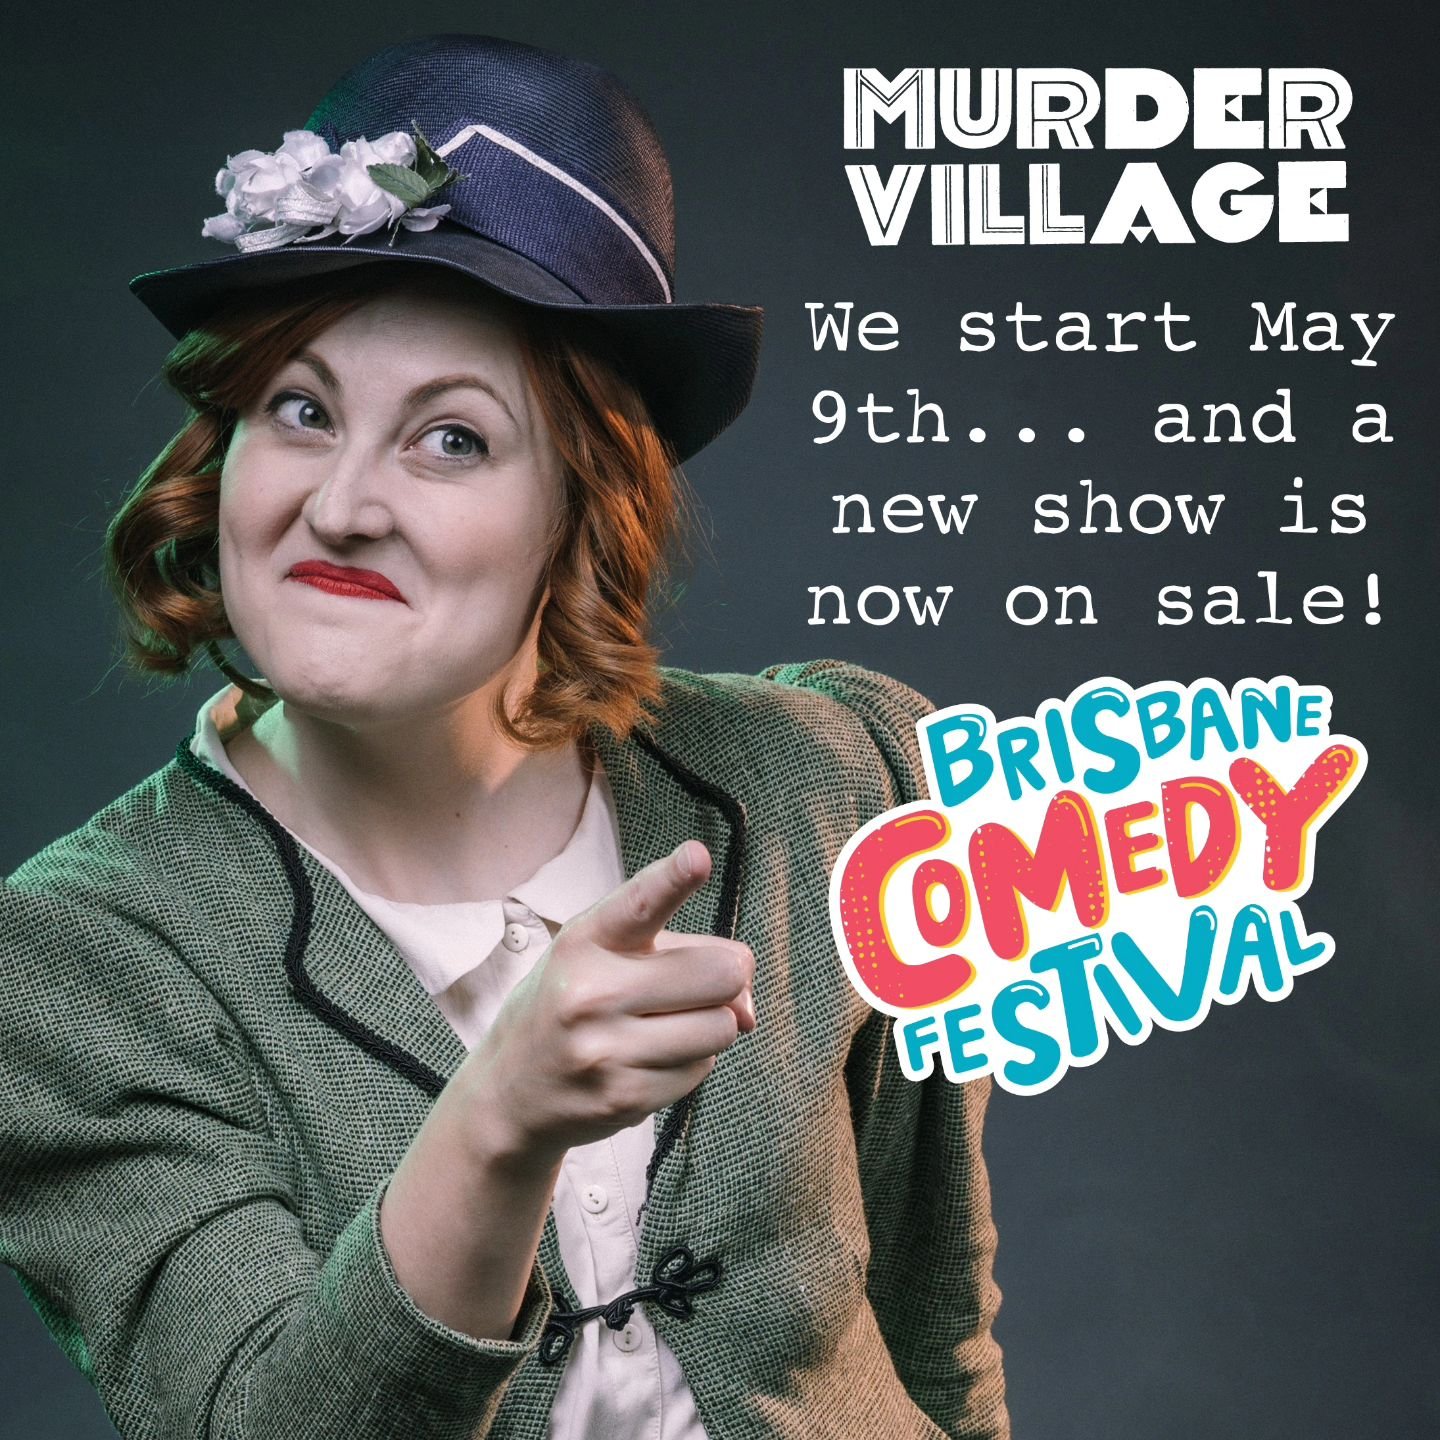 We have just about recovered from the month of murders at the @melbcomedyfestival - but the next festival run is kicking off next week! Murder Village's return to the @briscomedyfest stage this year is set to be a cracker - three of our four shows ar